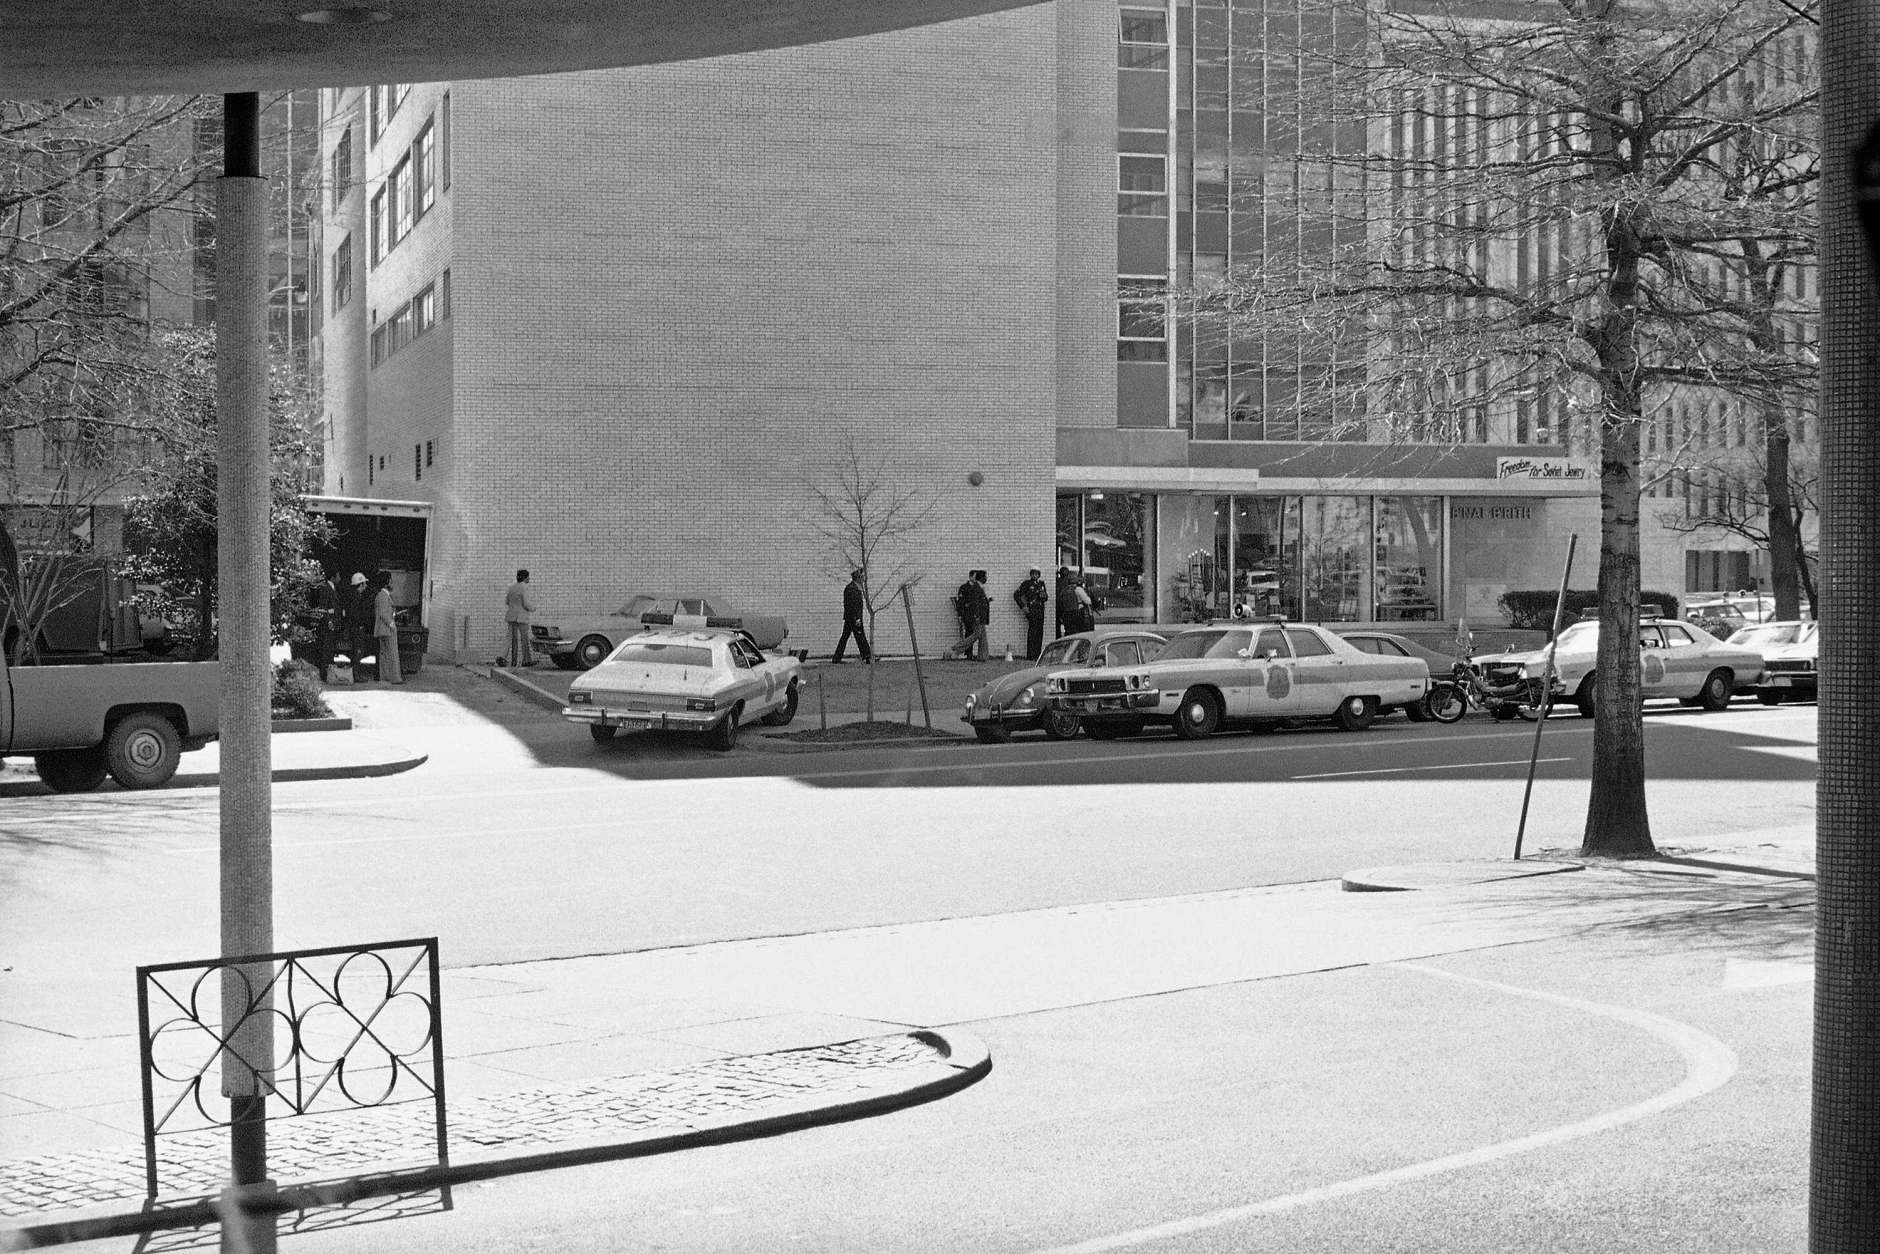 This is the entrance to the BNai BRith International headquarters in Washington on Wednesday, March 9, 1977 where four armed men are holding hostages. A sign over the entrance, right center, reads Freedom for Soviet Jewry. (AP Photo)